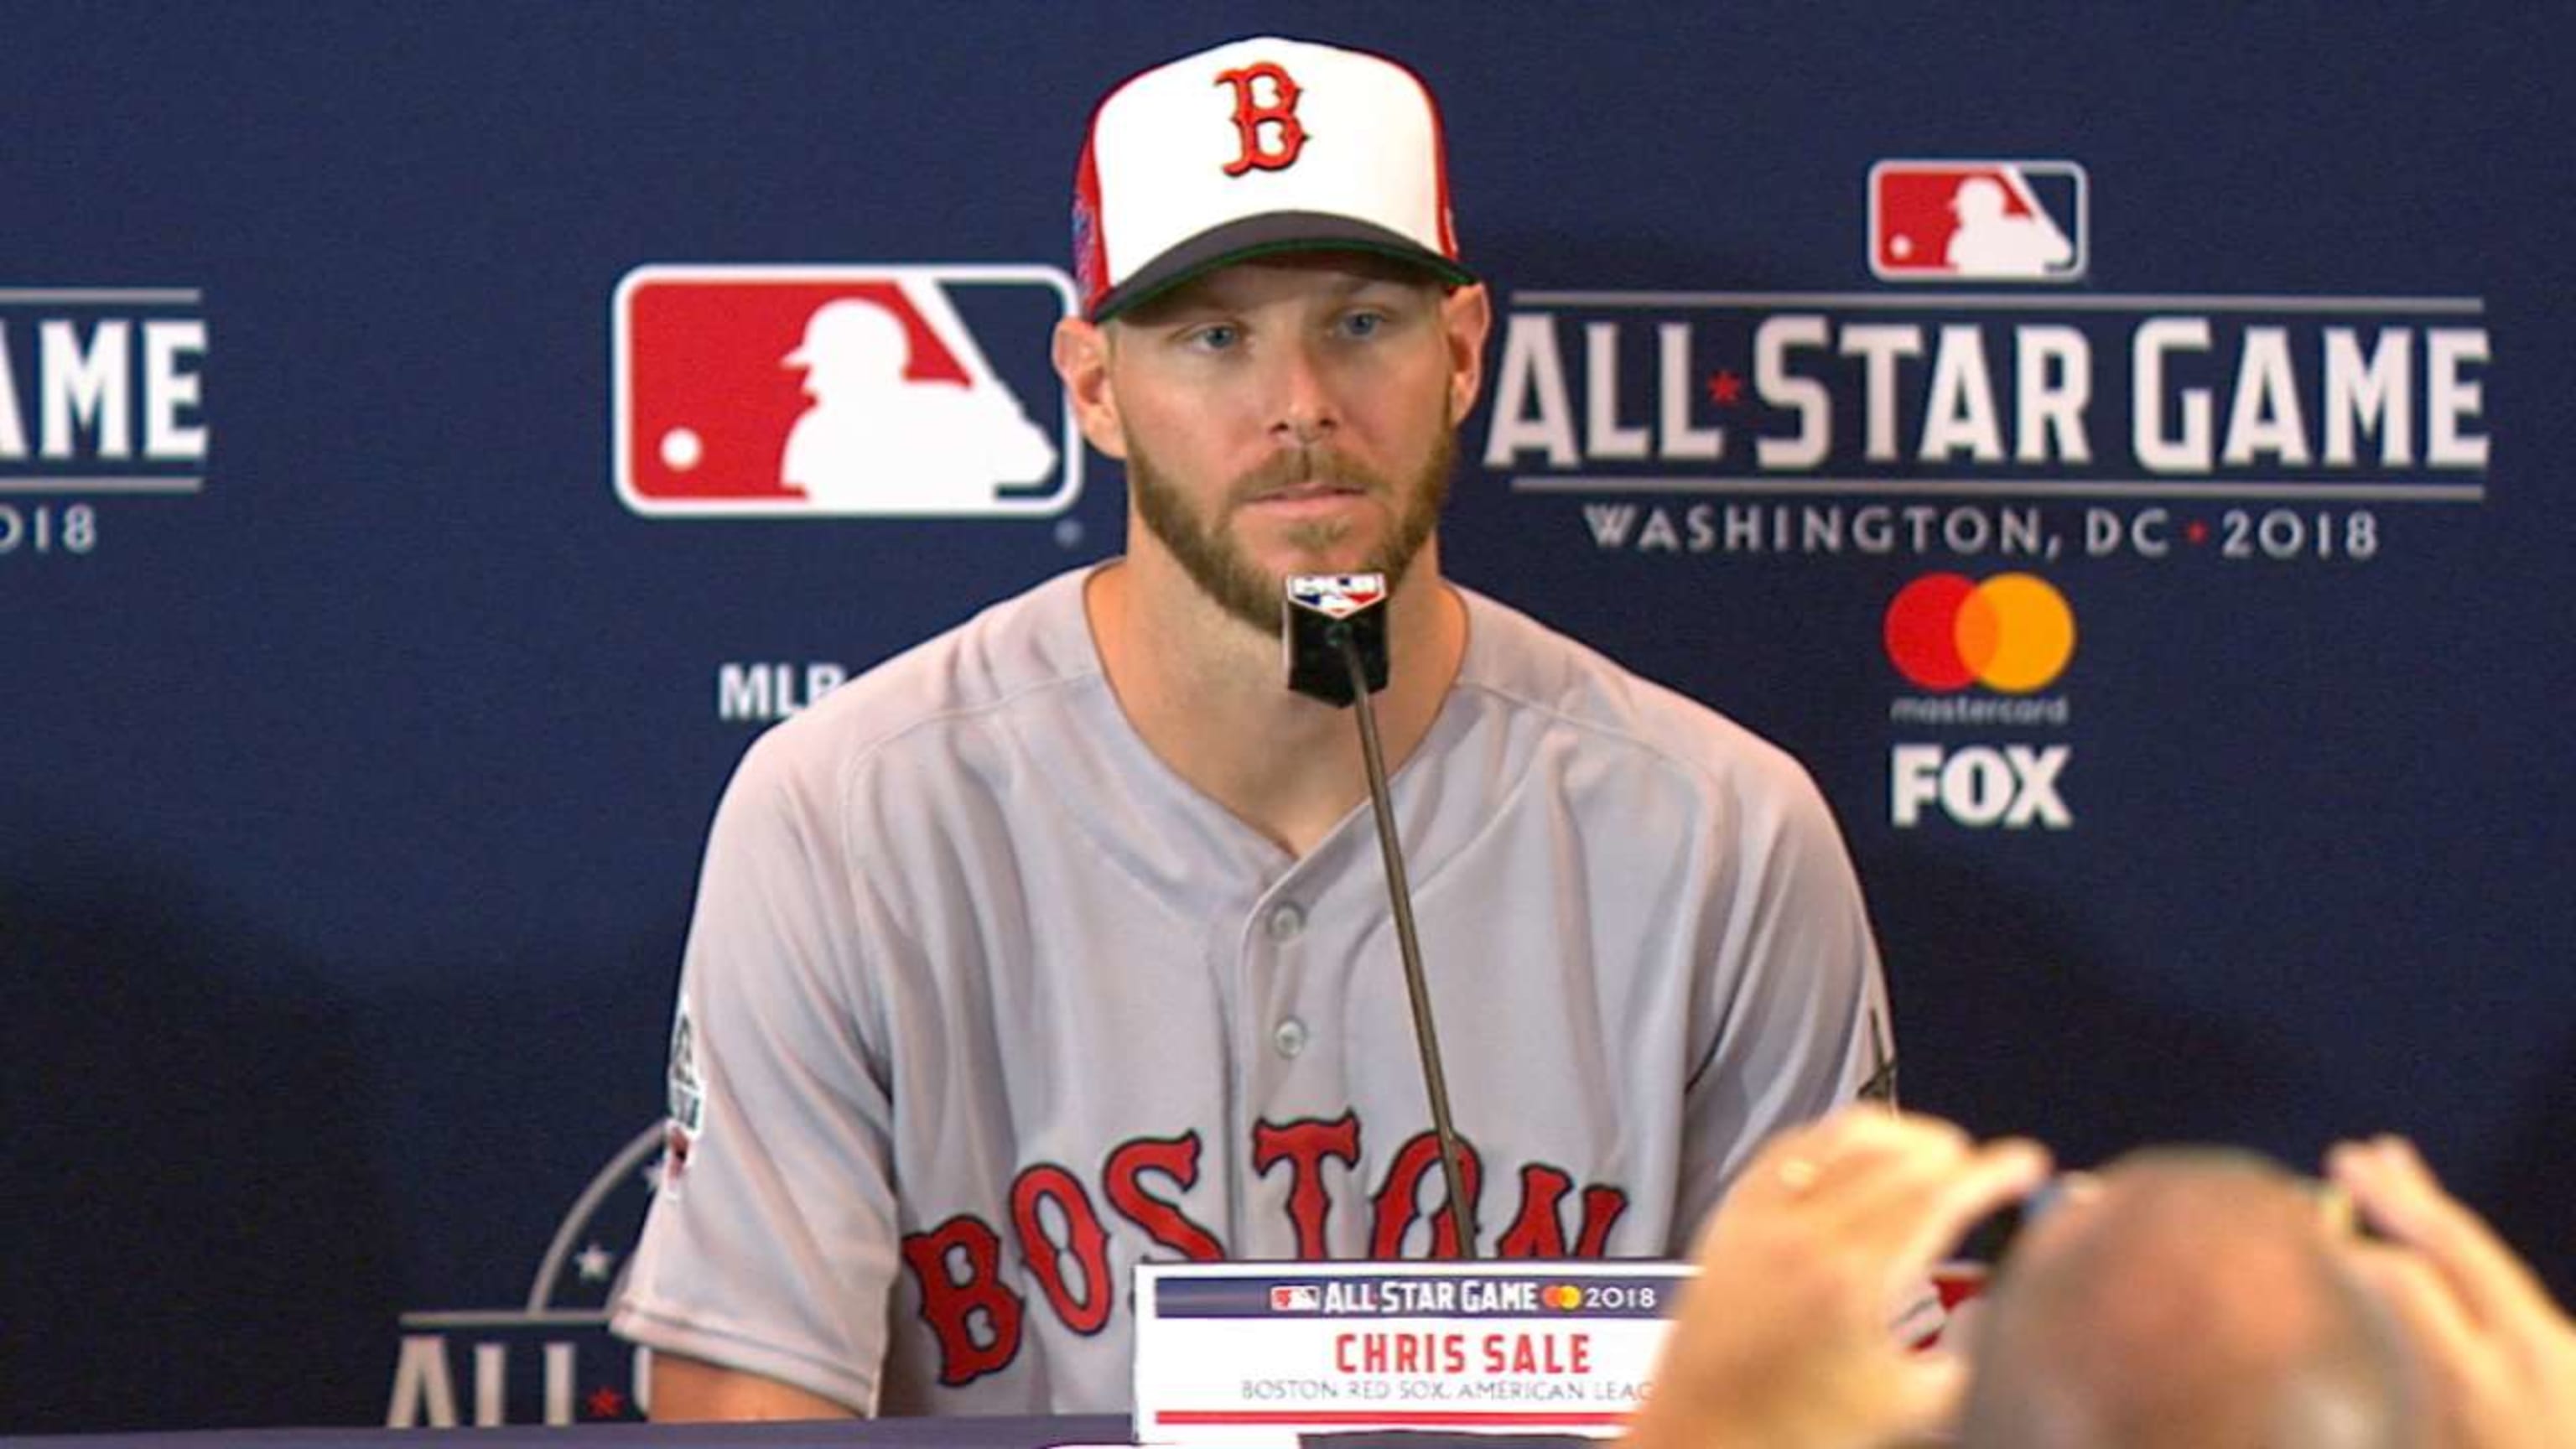 Chris Sale of Boston Red Sox, Max Scherzer of Washington Nationals named  All-Star Game starters - ESPN